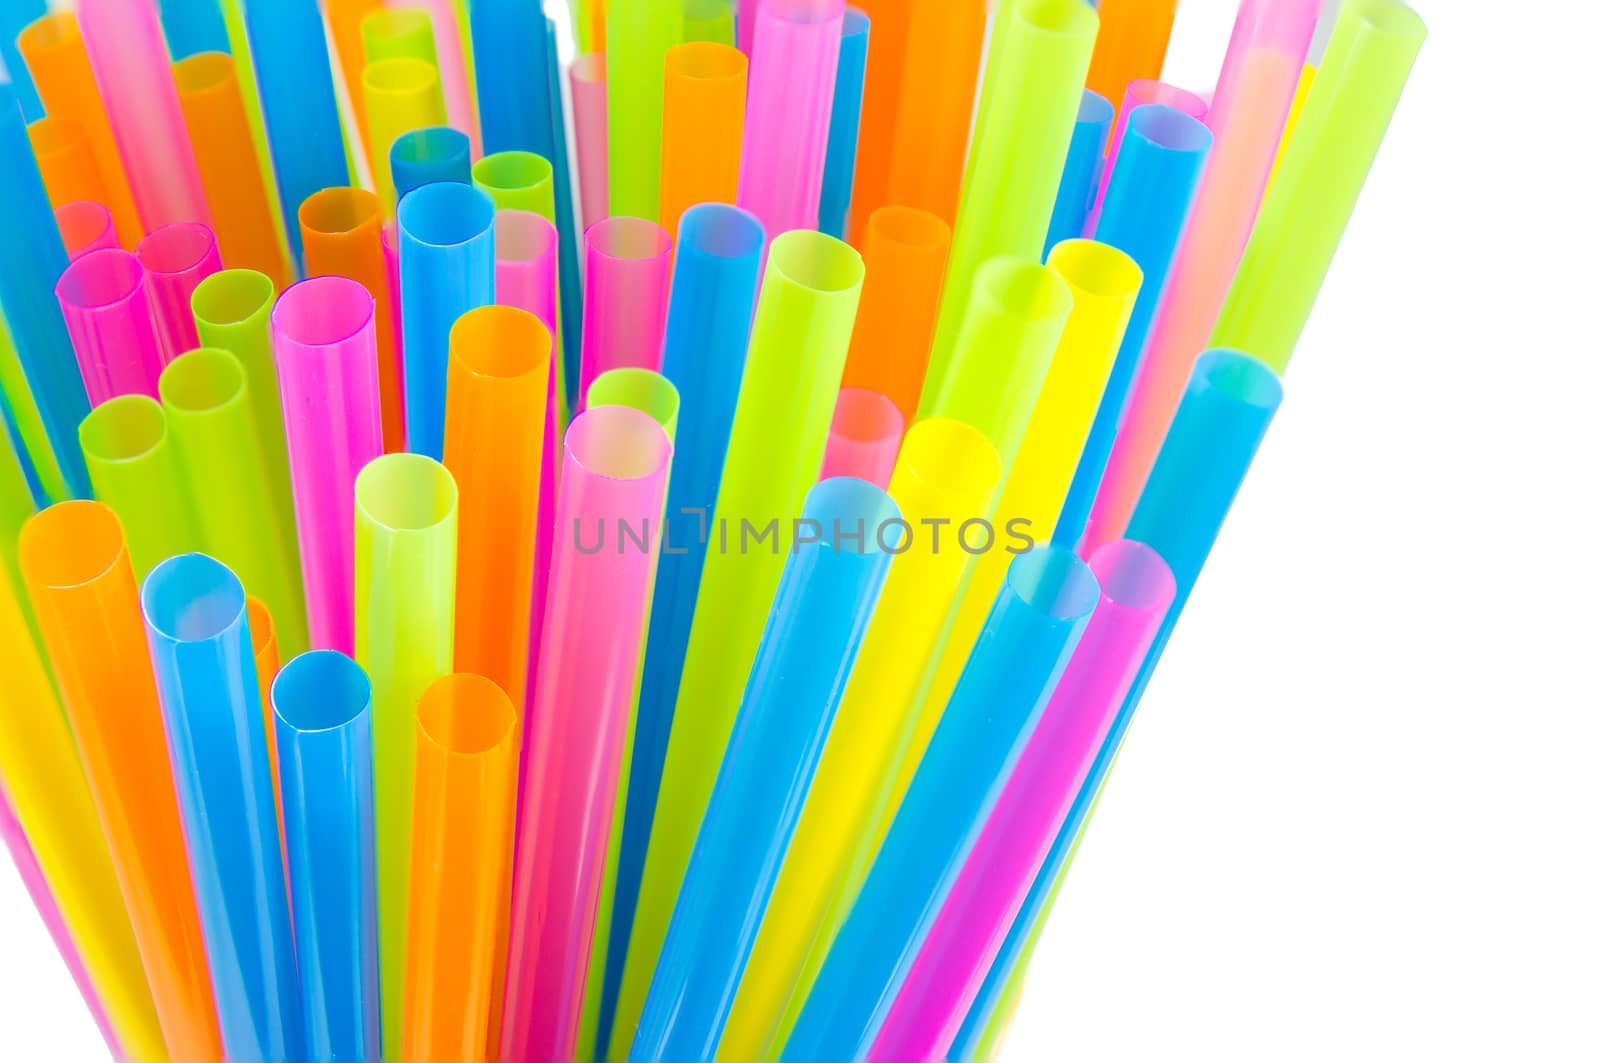 Colorful drinking straws isolated on white background by kasinv